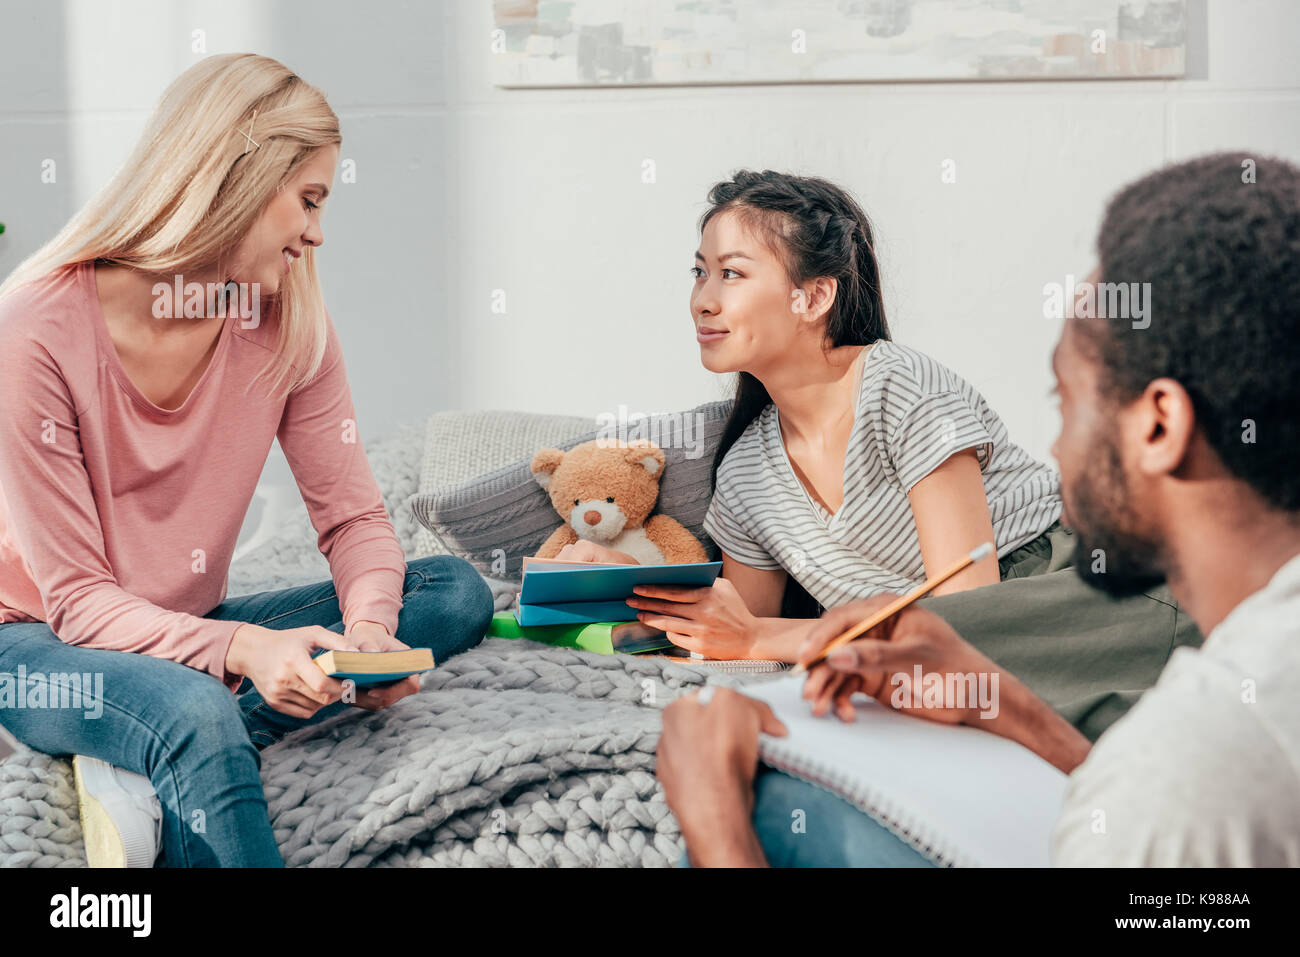 young students doing homework together Stock Photo